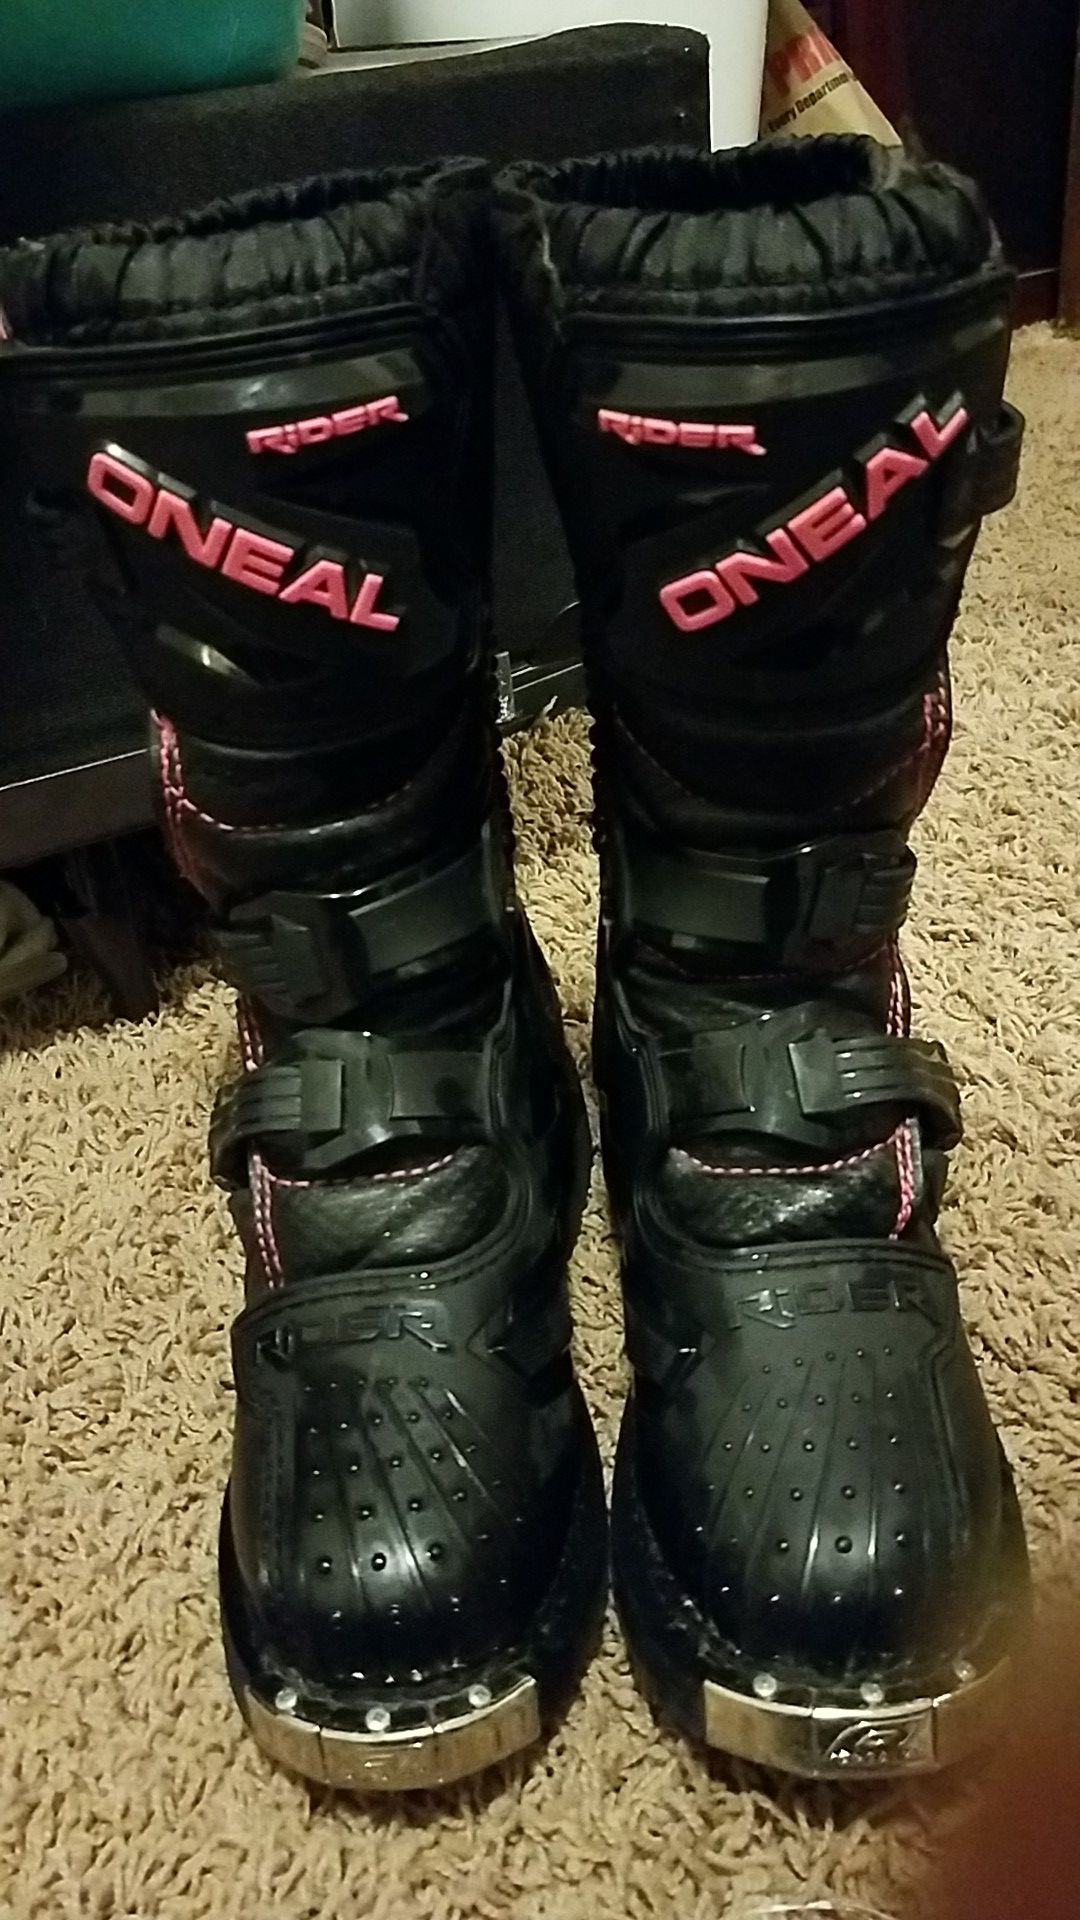 PENDING ~Oneal girls riding boots size 4